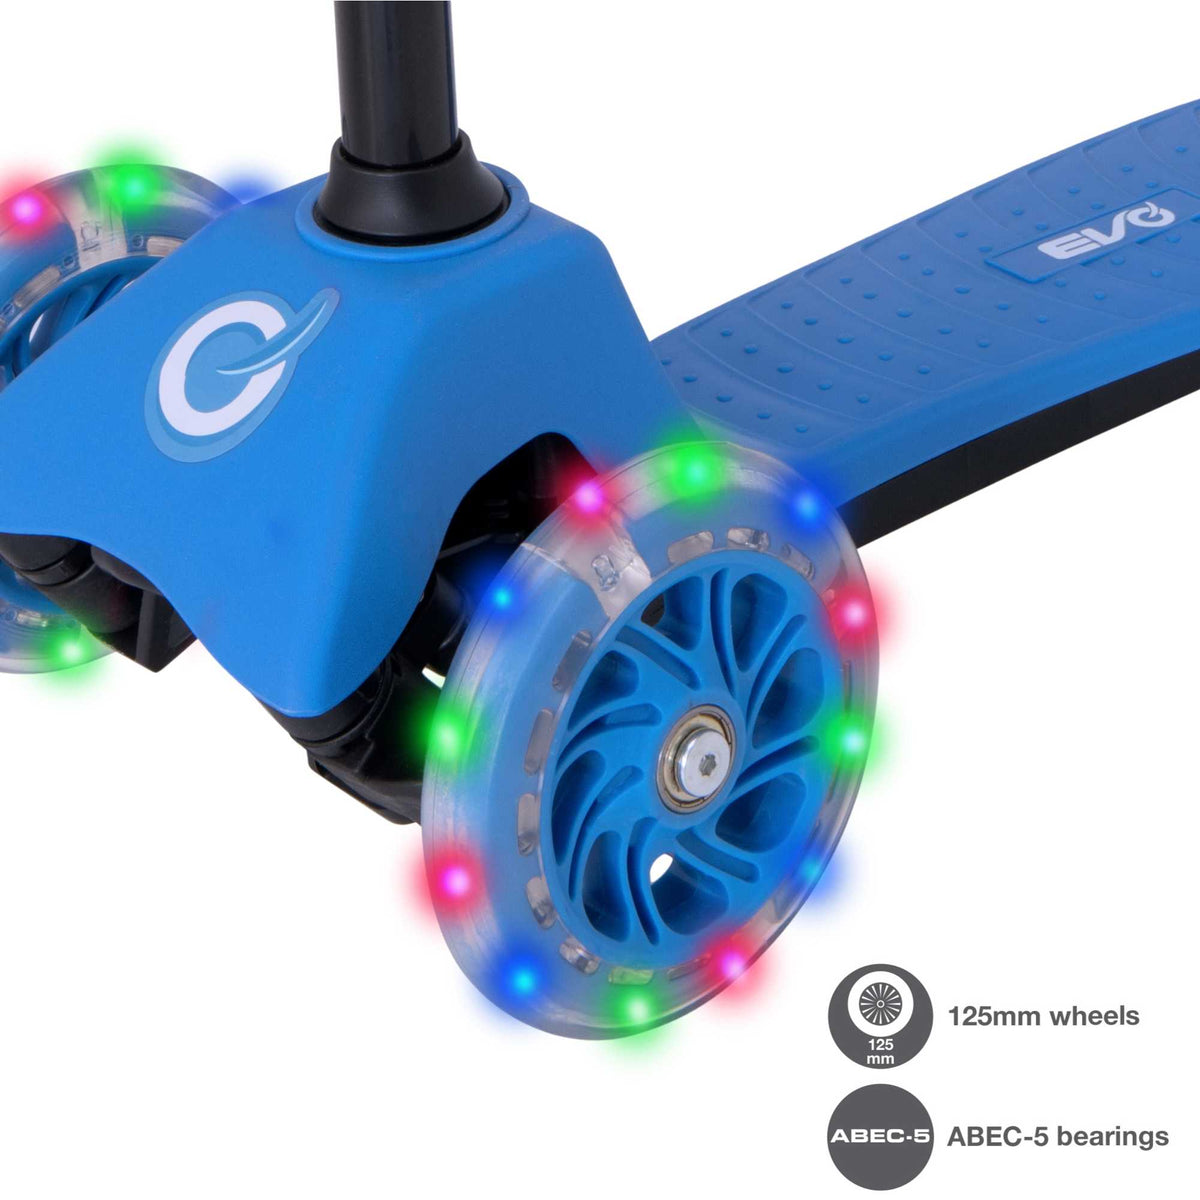 EVO Light Up Mini Cruiser Scooter With Light Up Wheels | Baby Blue